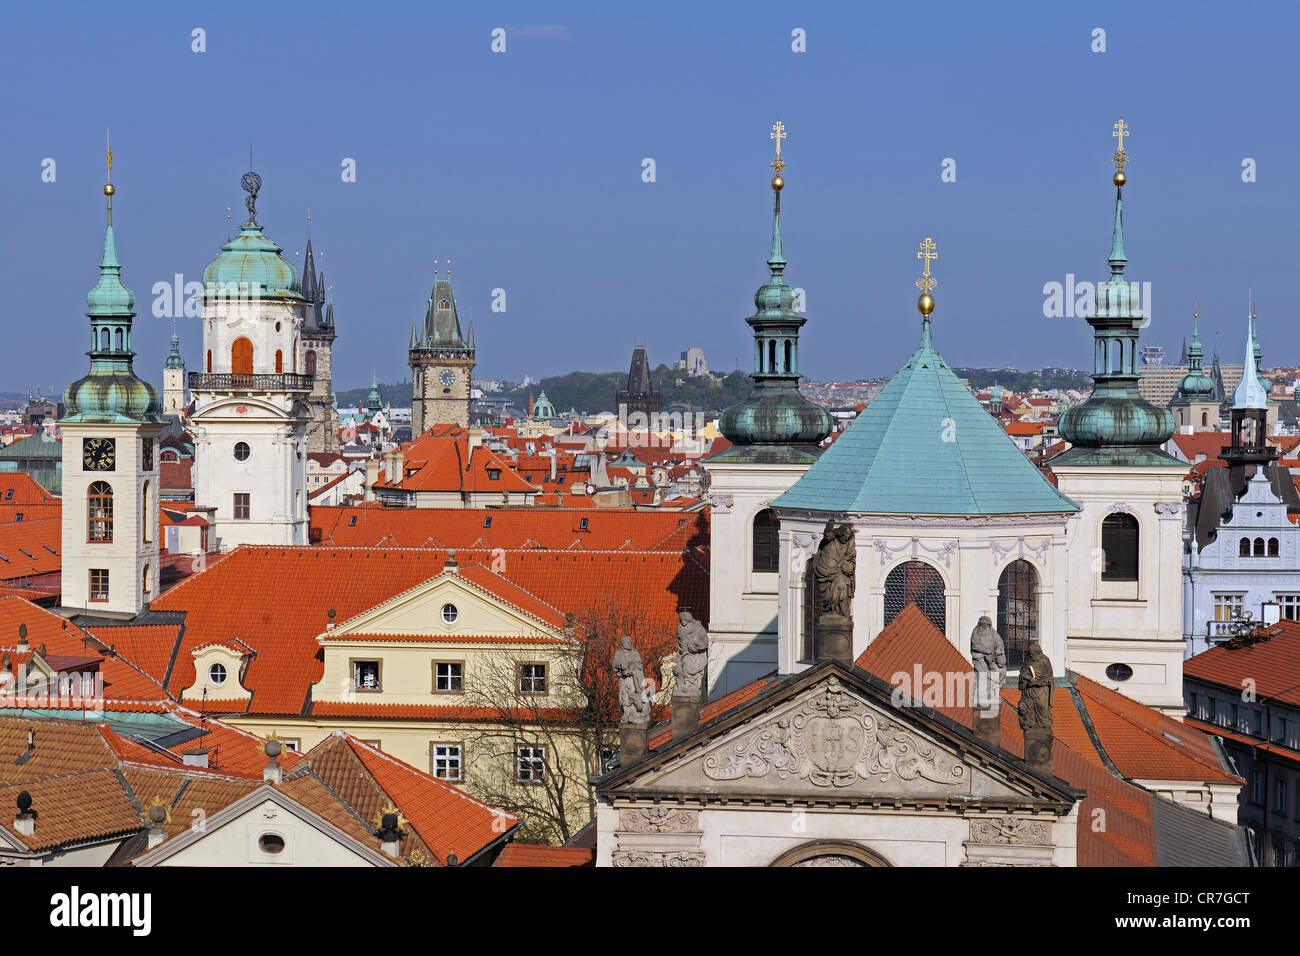 View from the Old Town Bridge Tower over the roofs of the historic town at night, Prague, Bohemia, Czech Republic, Europe Stock Photo